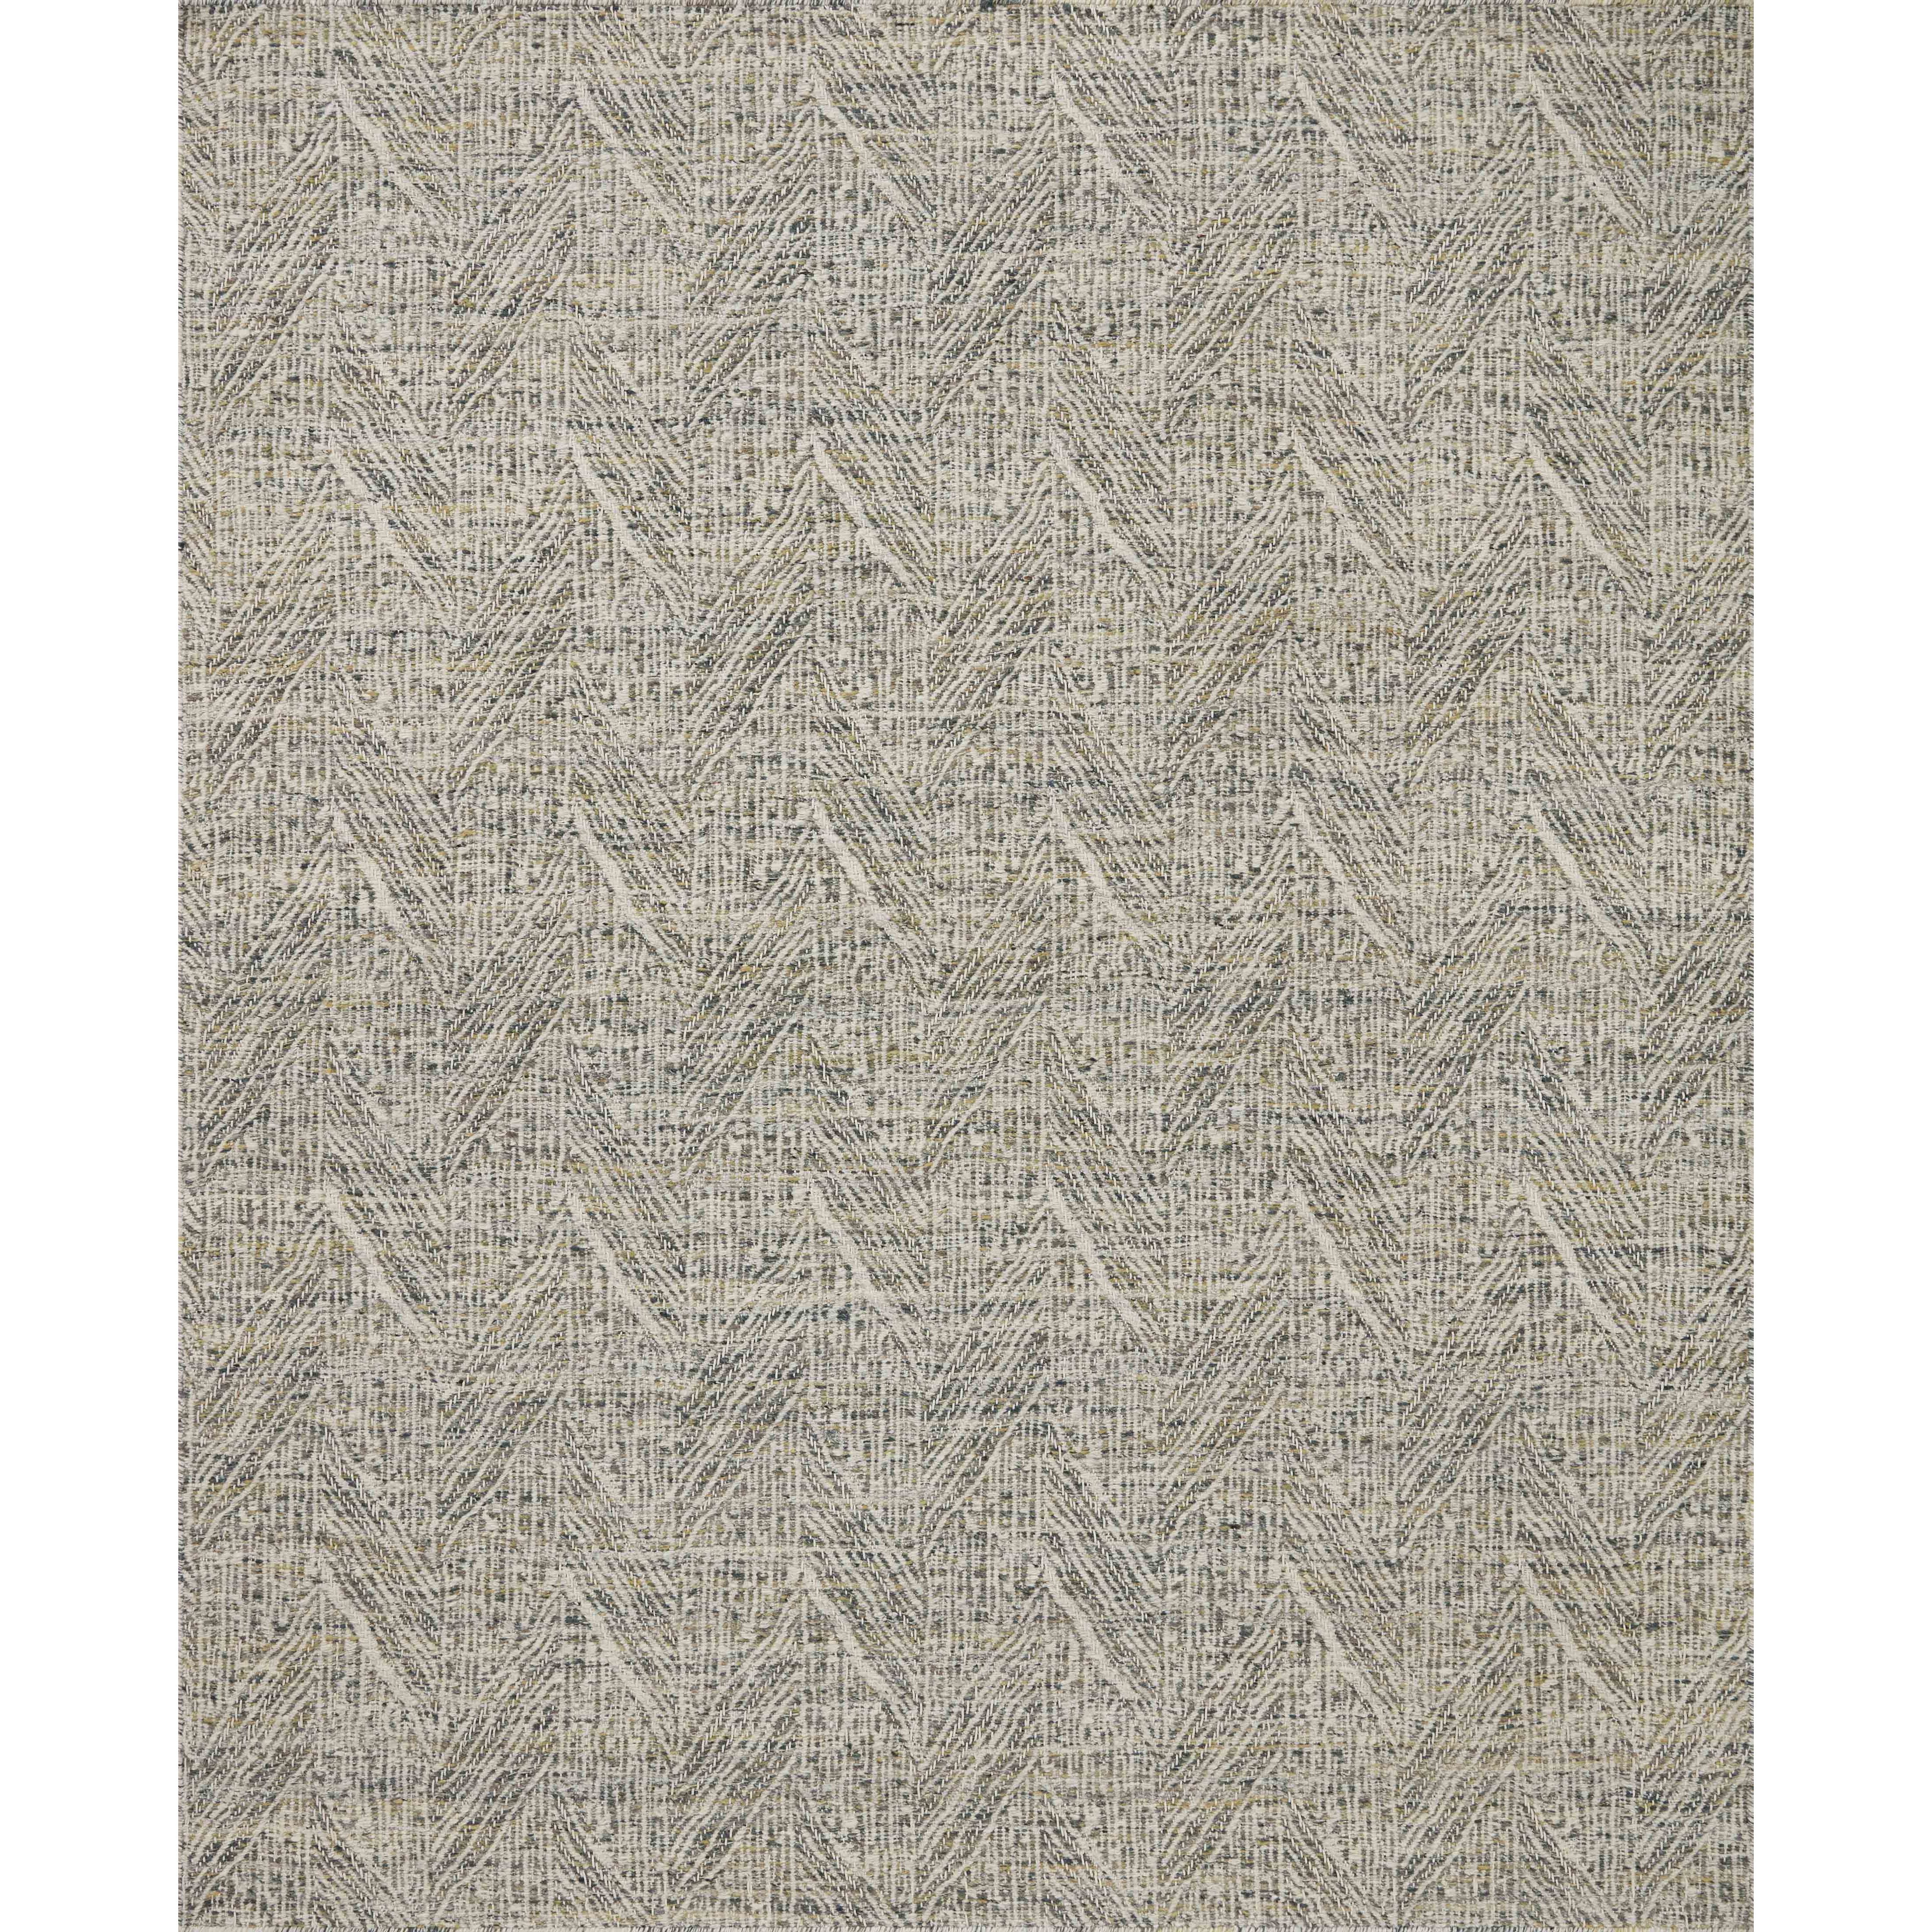 The Raven Moss / Ivory Rug is intricately handwoven with delicate, fine yarns that amplify the rug's layered and dimensional geometric design. While the rug itself is thick and sturdy, the colors and patterns have a casual lightness that can work in many spaces, from busy living rooms to serene bedrooms. Amethyst Home provides interior design, new construction, custom furniture, and area rugs in the Scottsdale metro area.